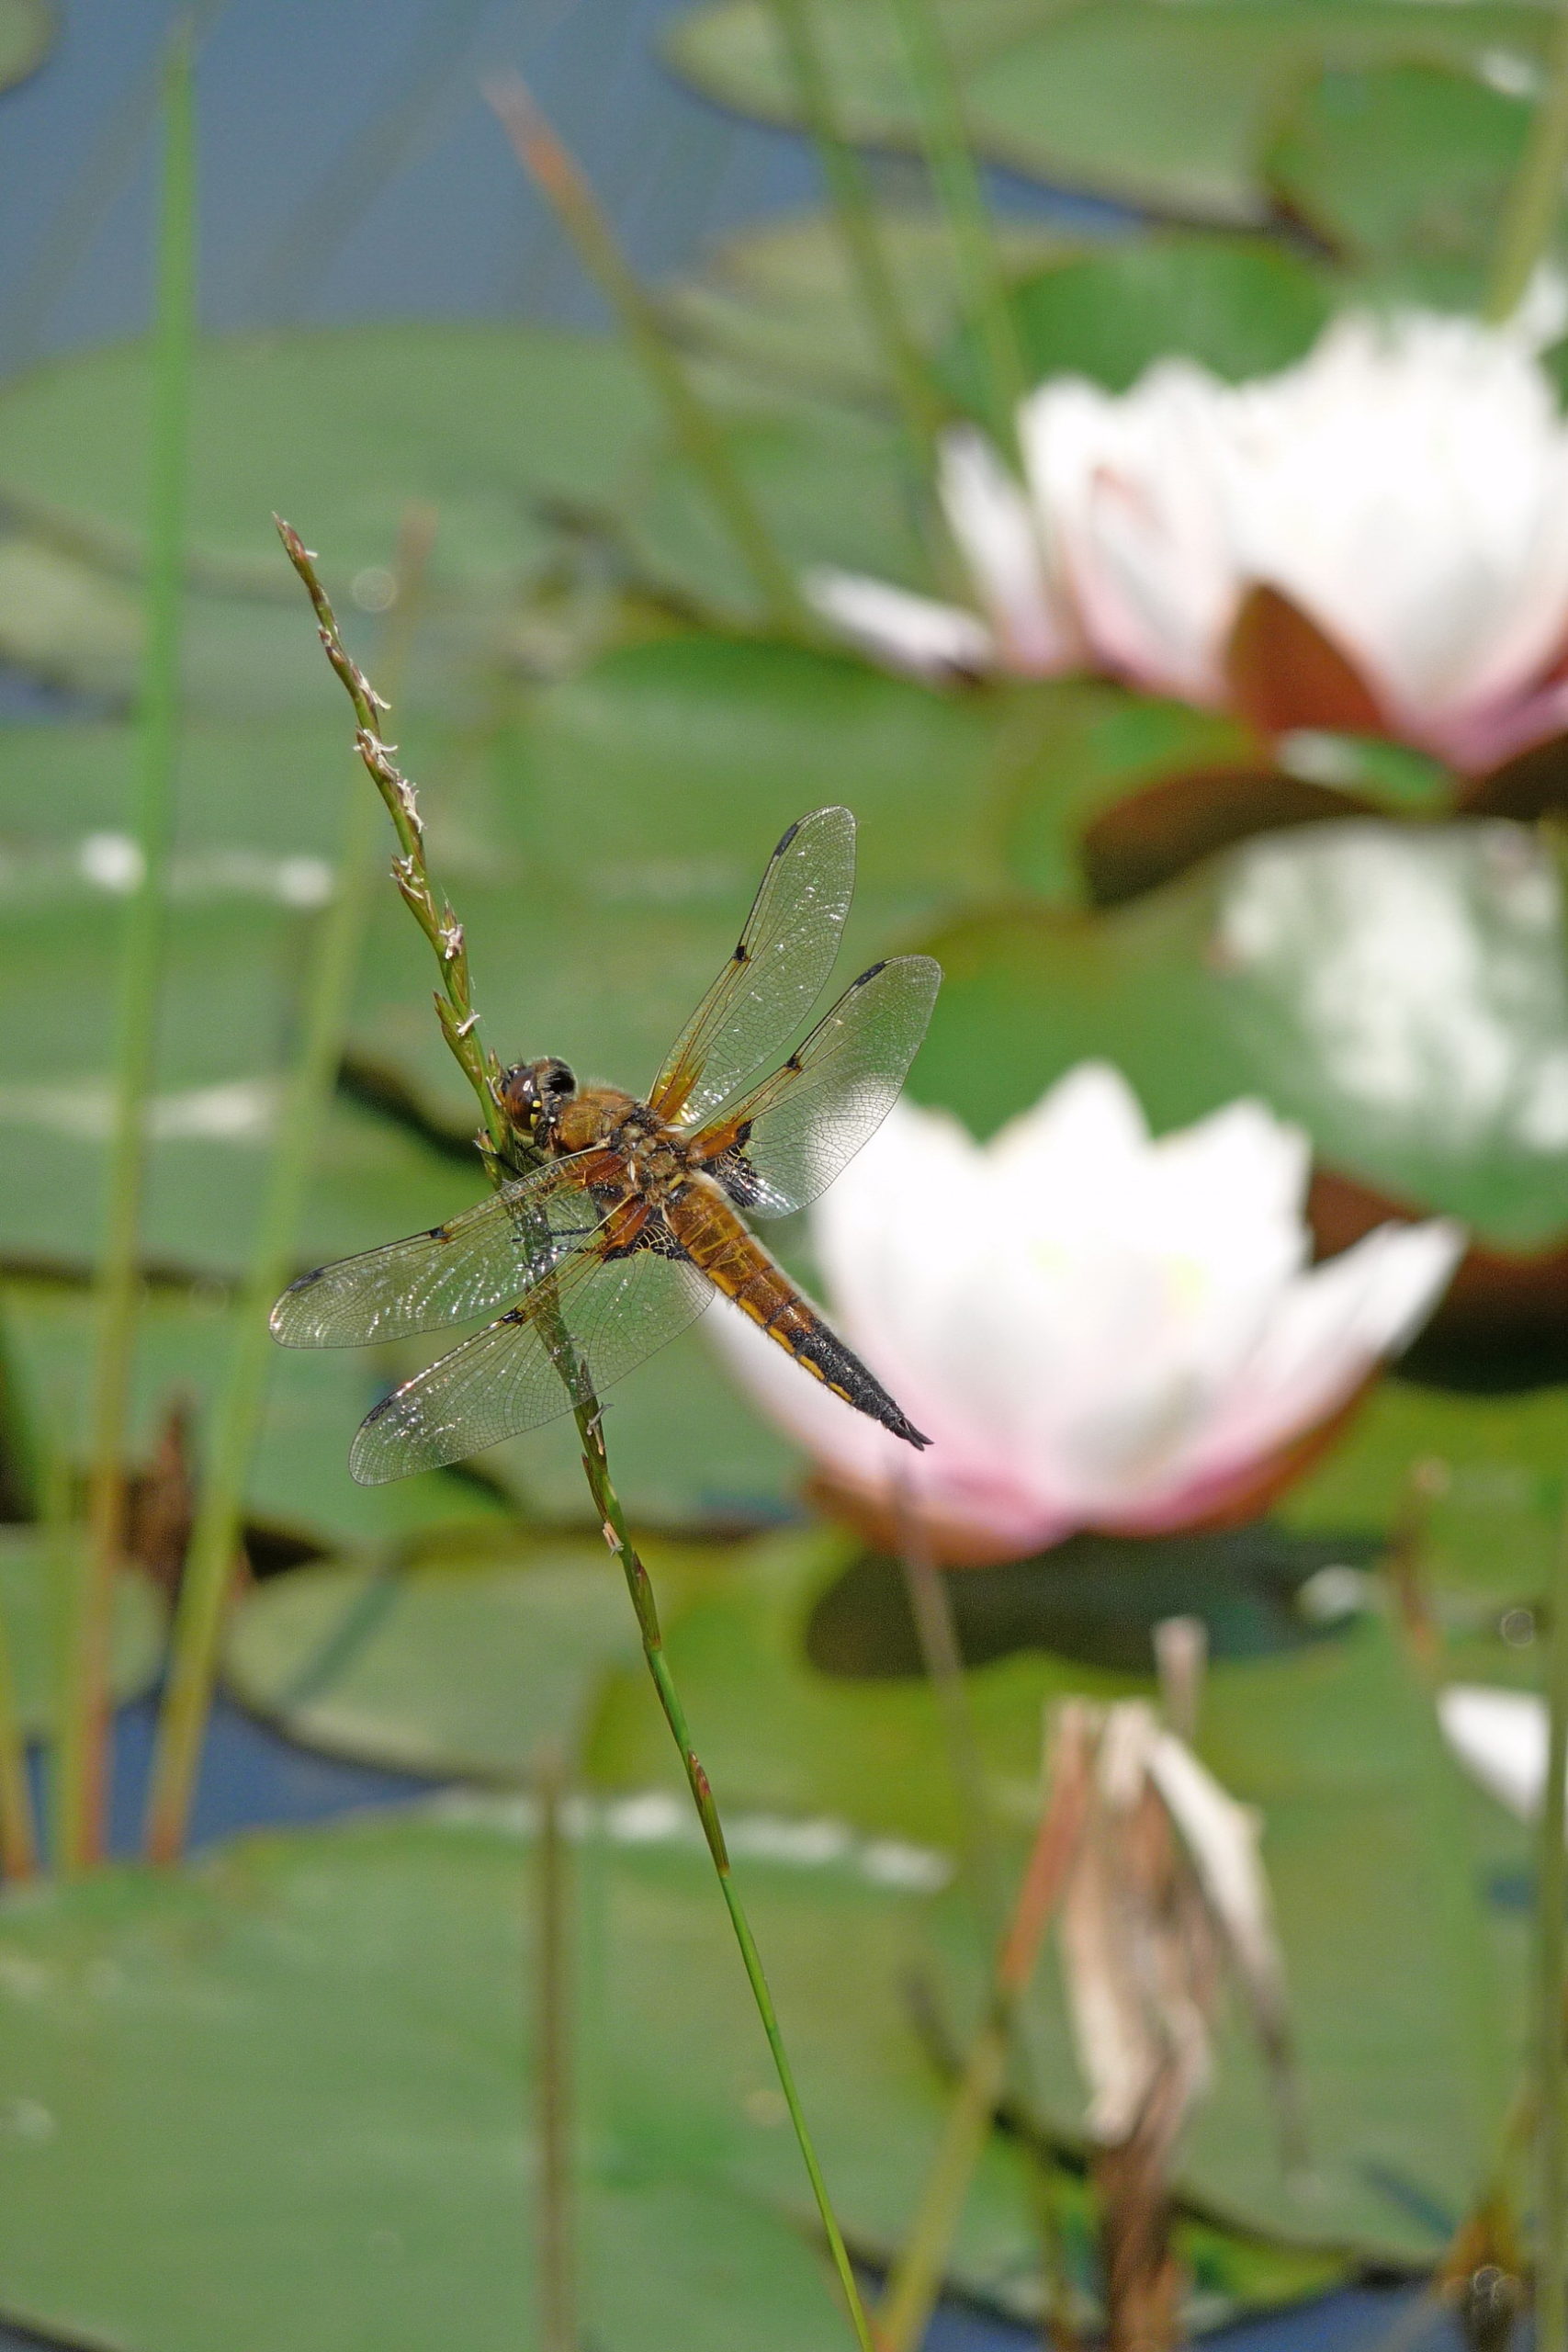 Four-Spotted Chaser Dragonfly, Libellula quadrimaculata, by Water Lilies